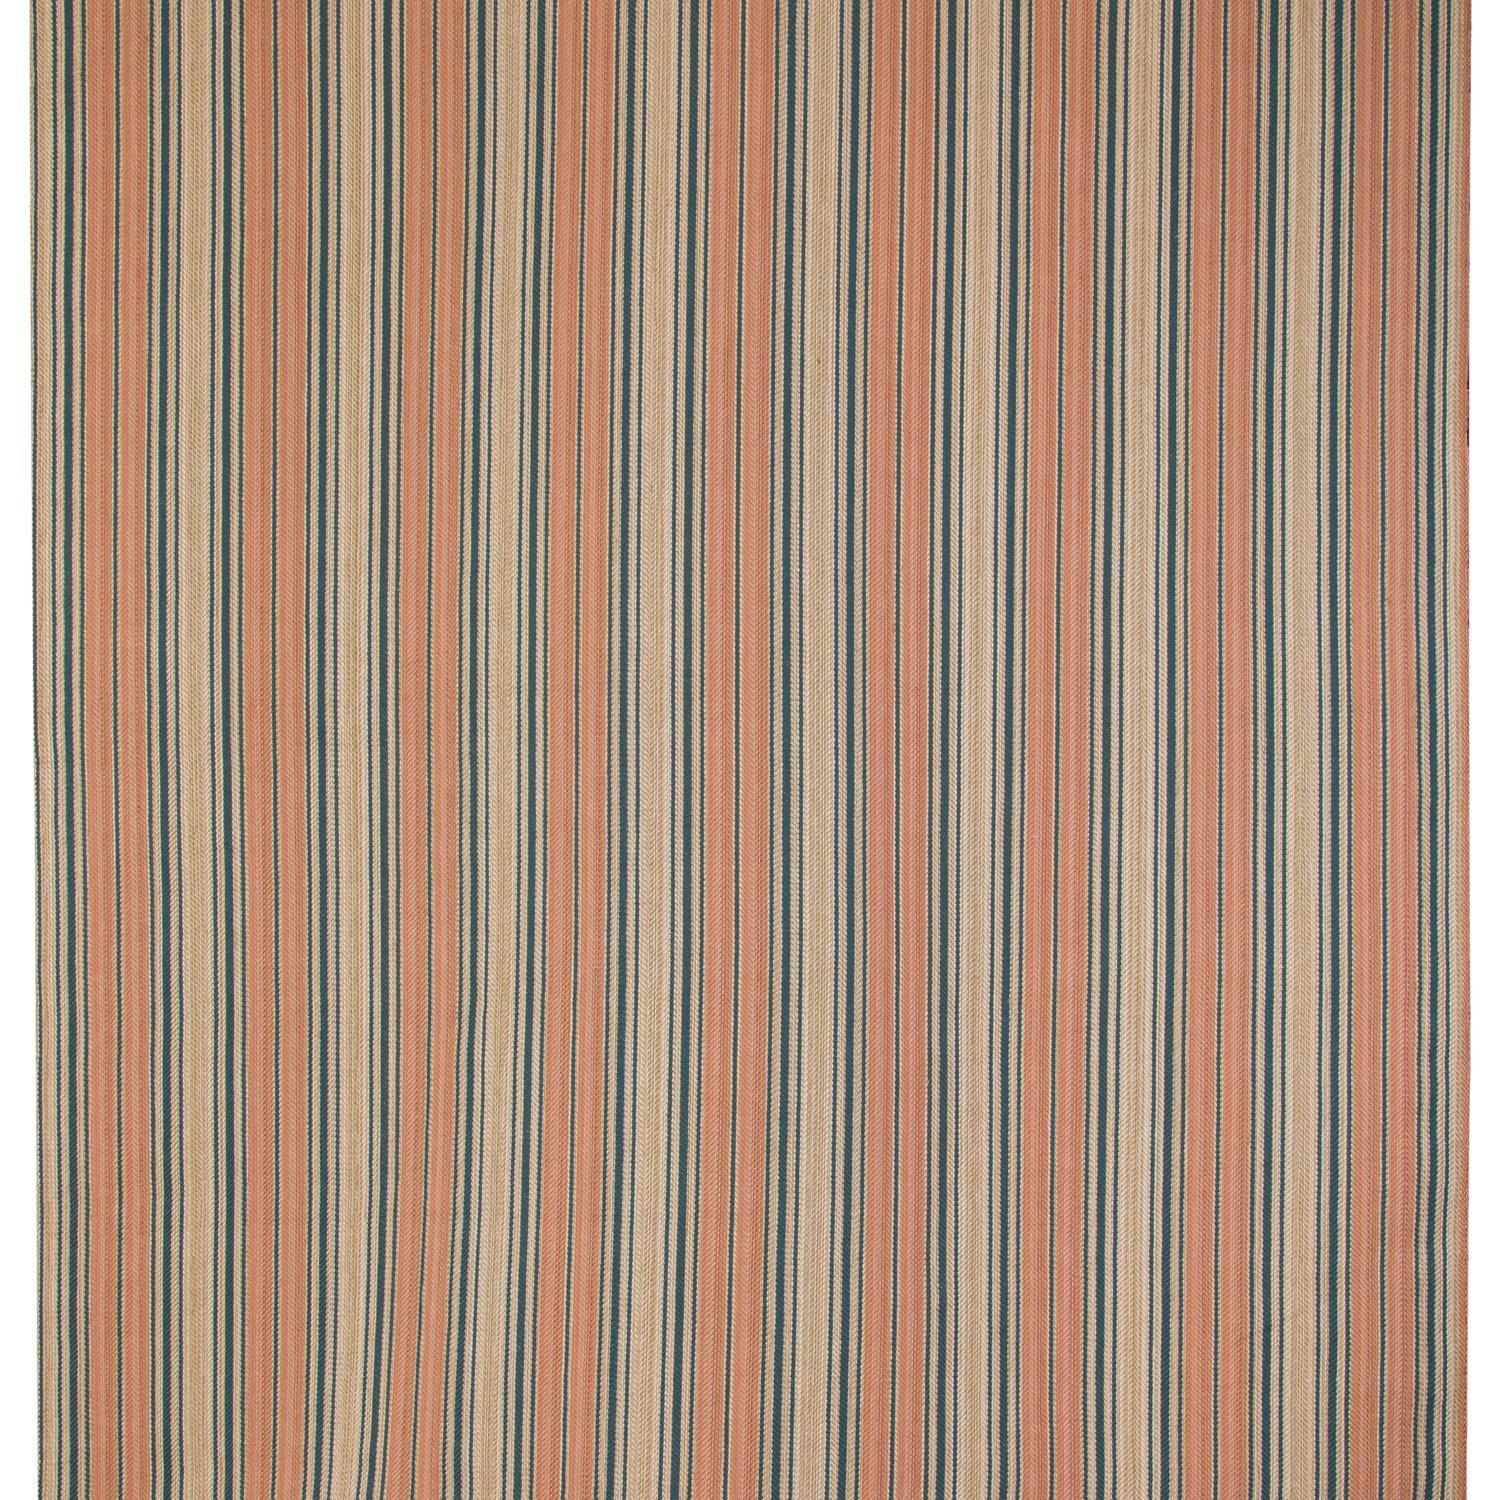 This is a semi mechanical Filaticio fabric and it is woven on an original loom from the 1850s. The Spinone fabric belongs to the Antico Setificio Fiorentino archives. This fabric can be used for all kinds of upholstery such as sofas, armchairs,